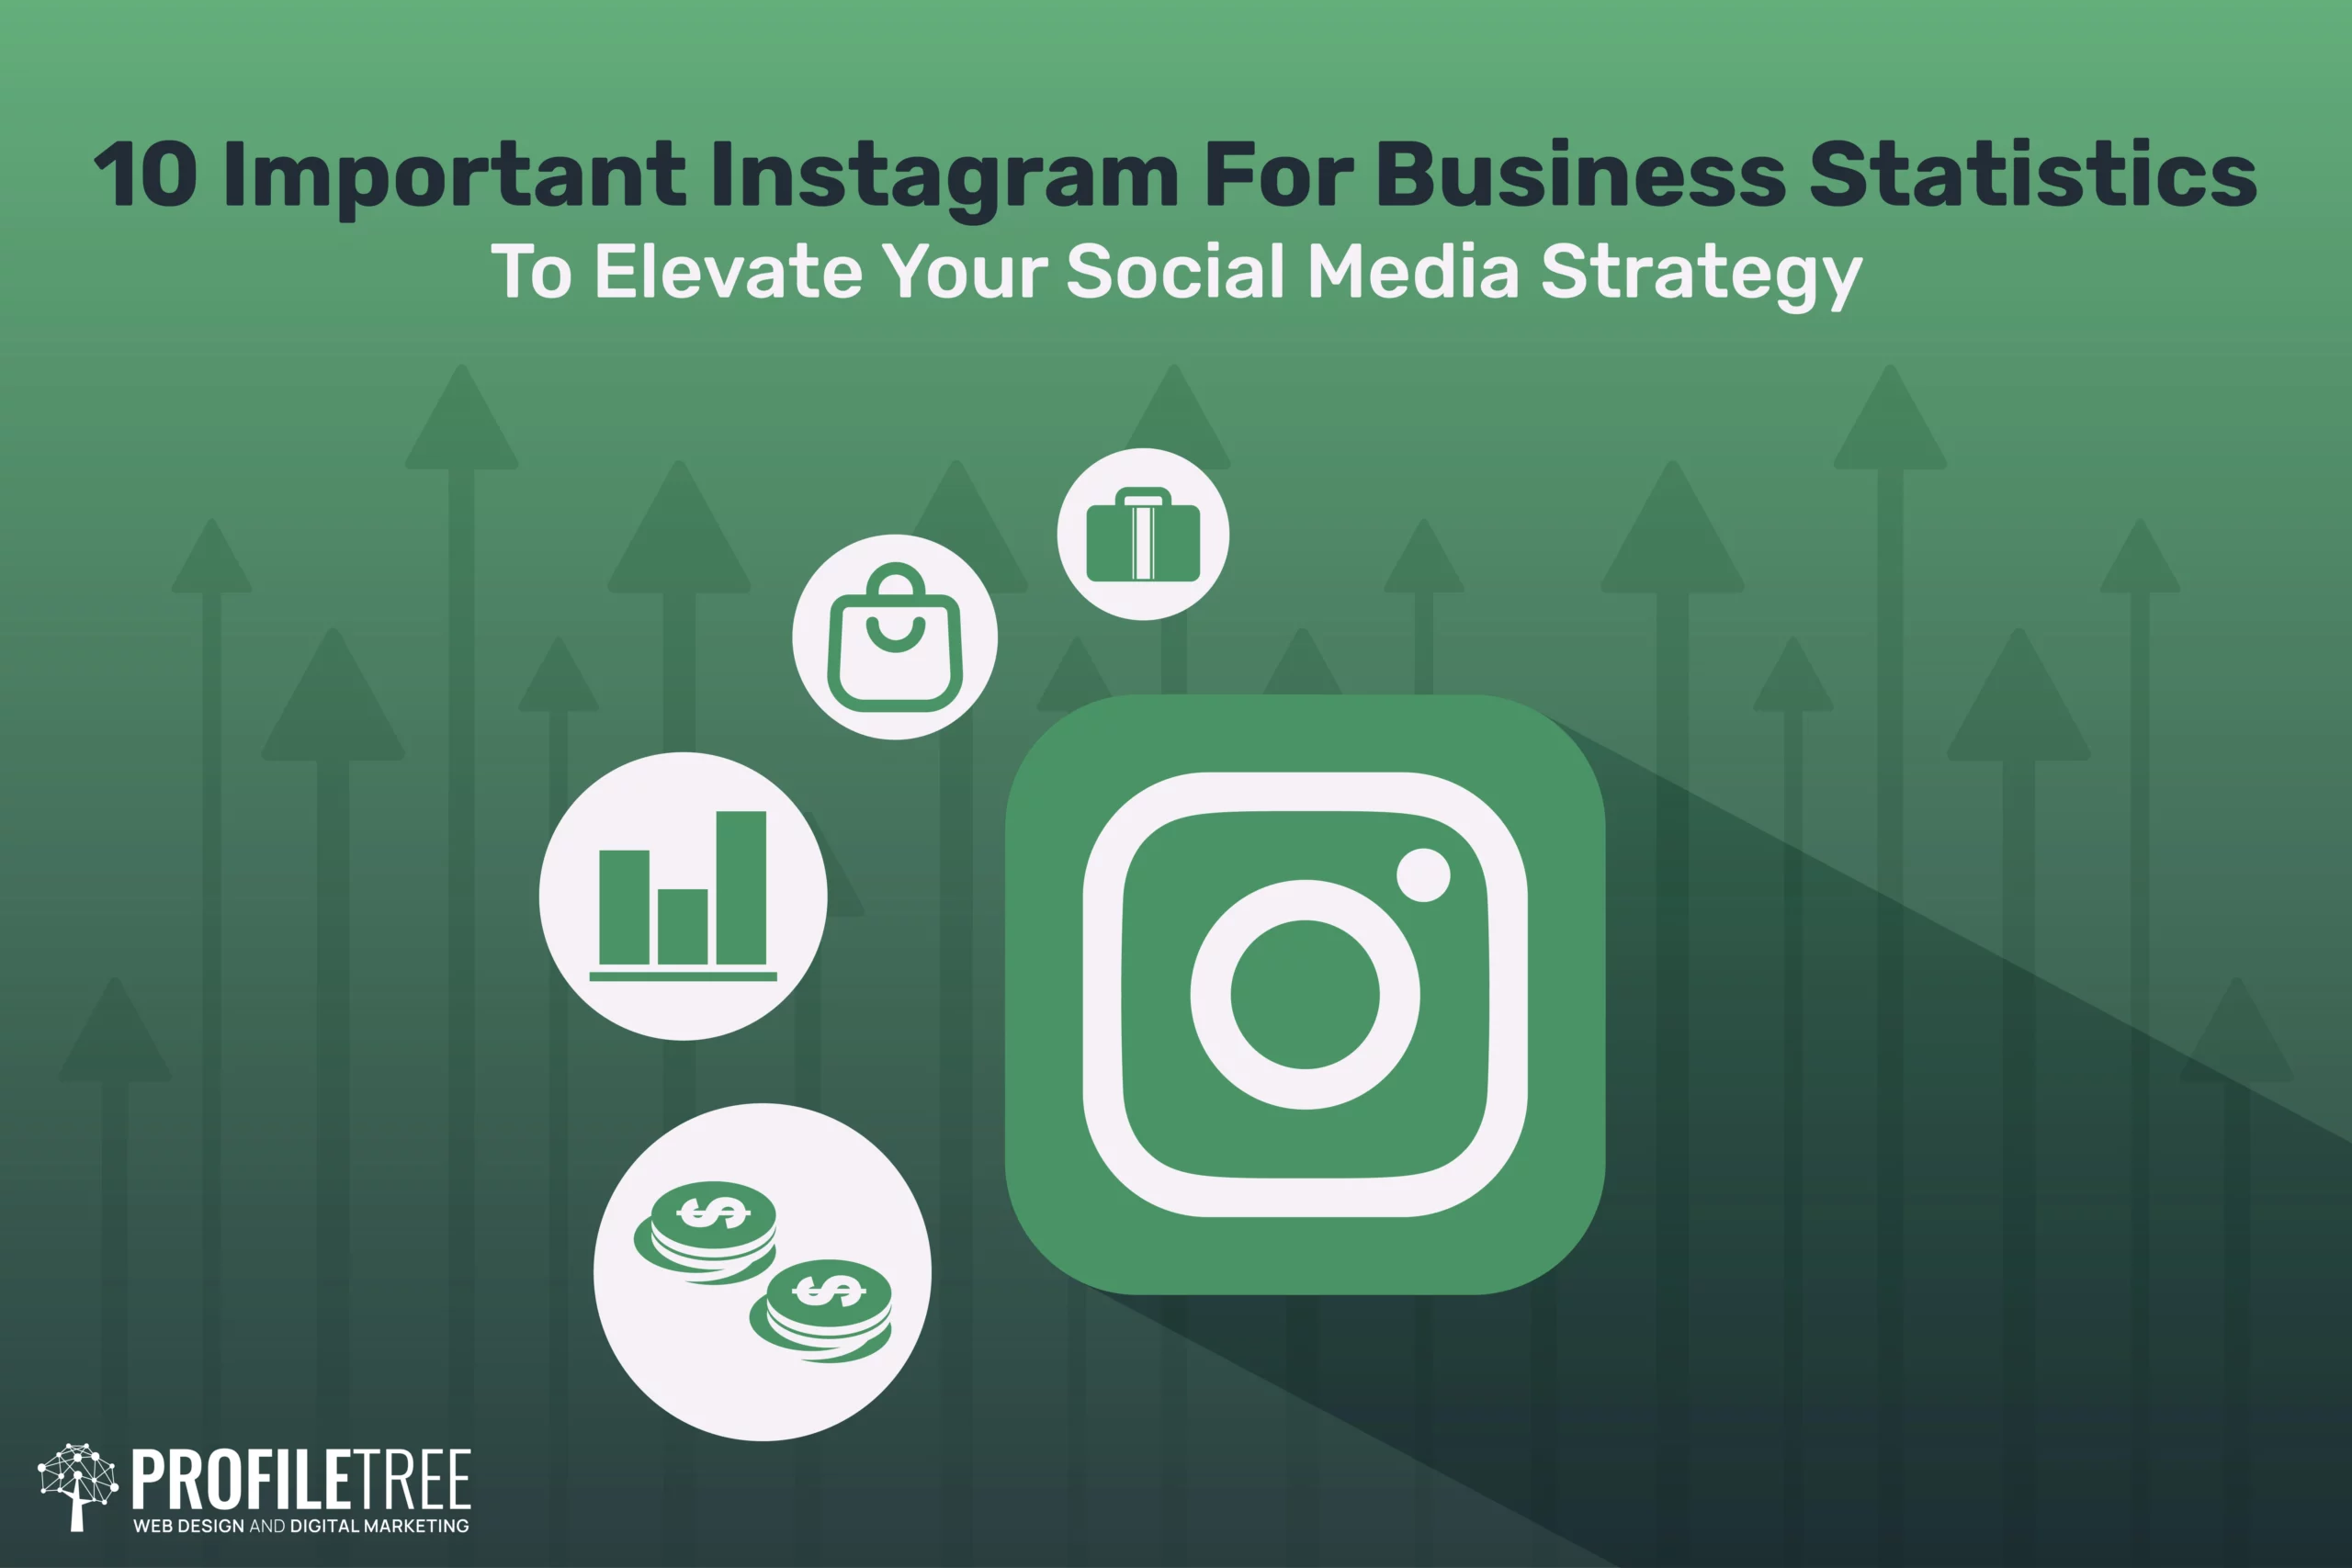 10 Important Instagram For Business Statistics To Elevate Your Social Media Strategy